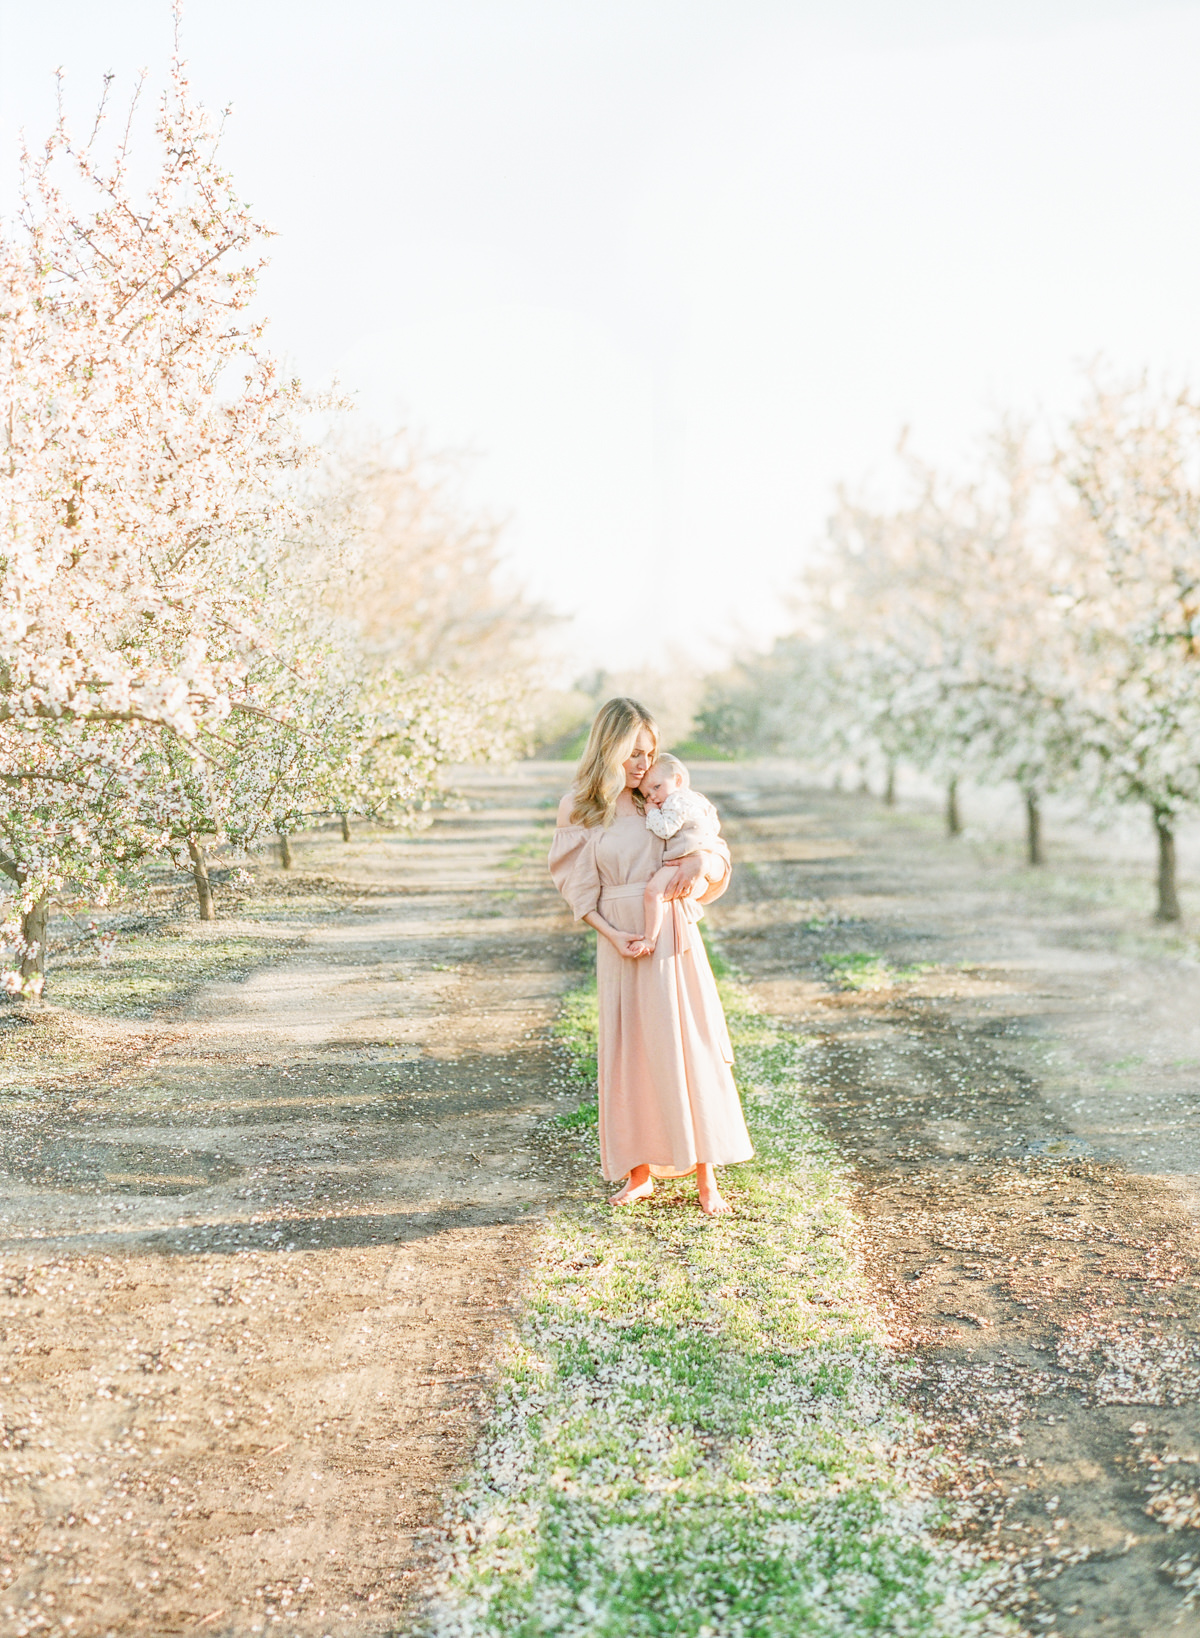 Central Valley Family Session, Almond Grove, Family Photography on Film, Beautiful Mother and Child, San Francisco Bay Area Family Film Photographer Kent Avenue Photography Light and Airy 